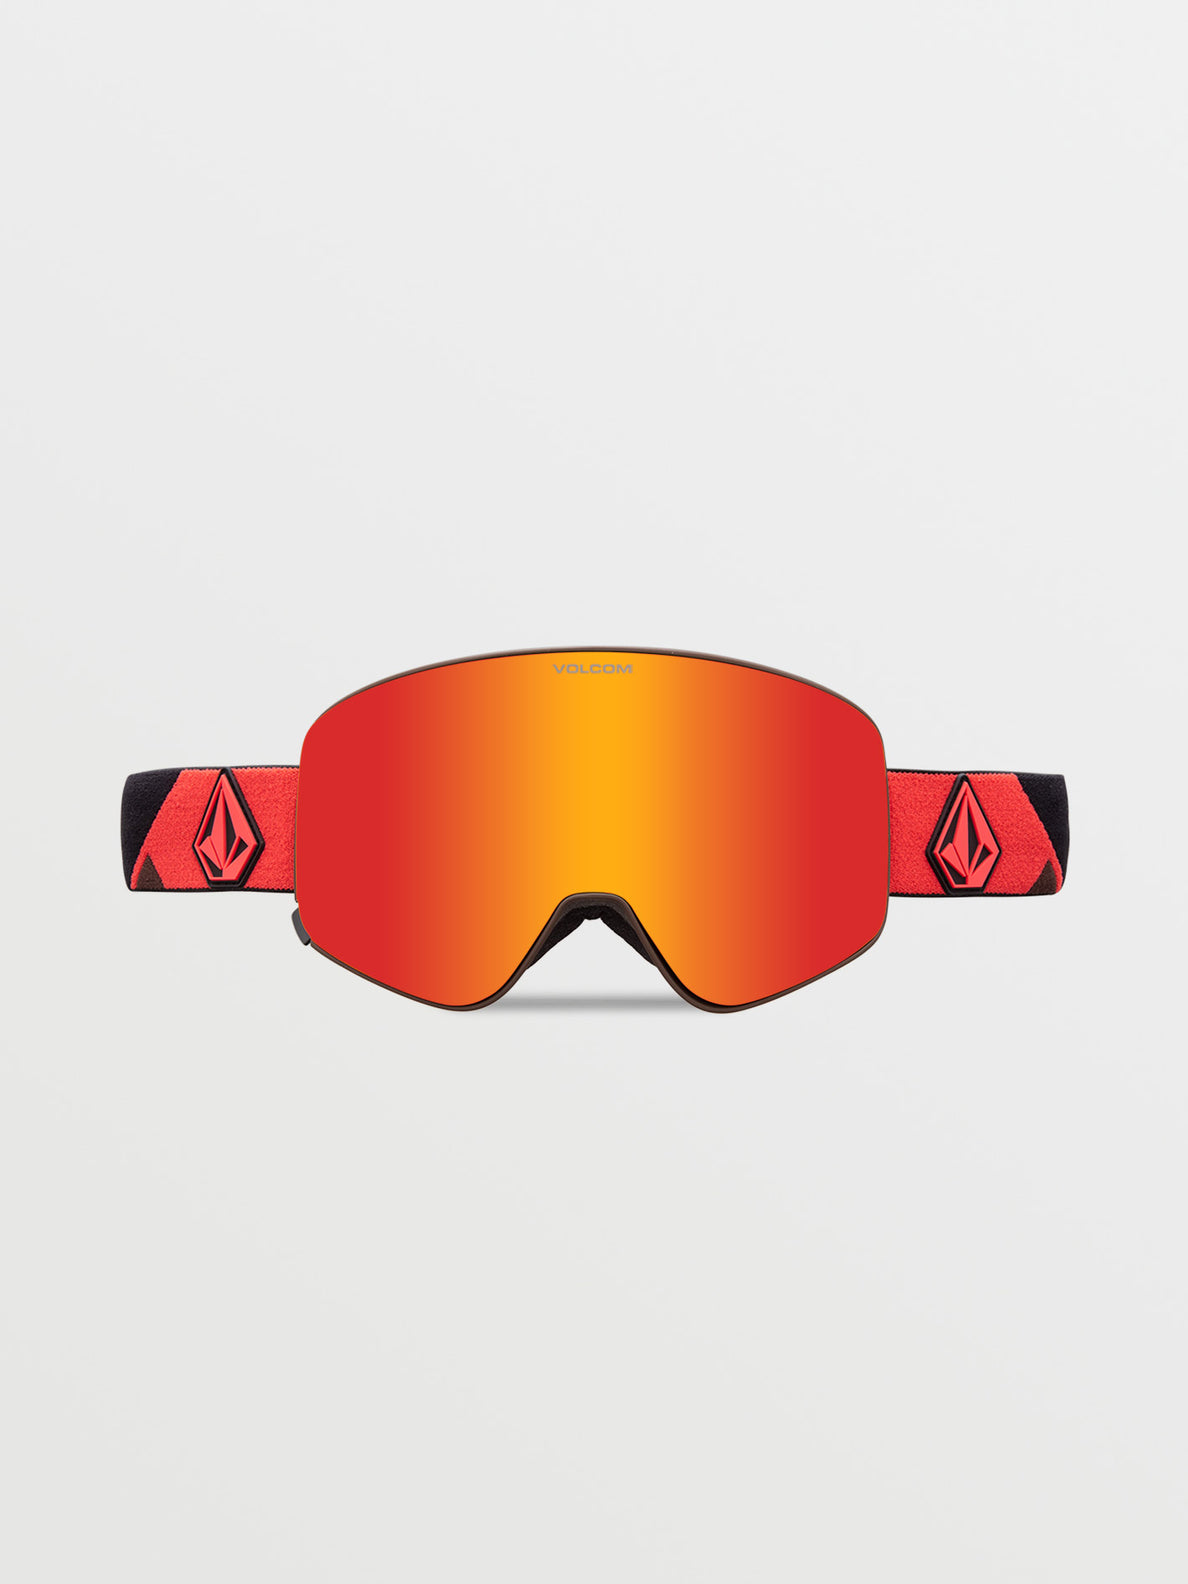 Odyssey Goggle - Orange/Brown / Red Chrome+BL / Buckle